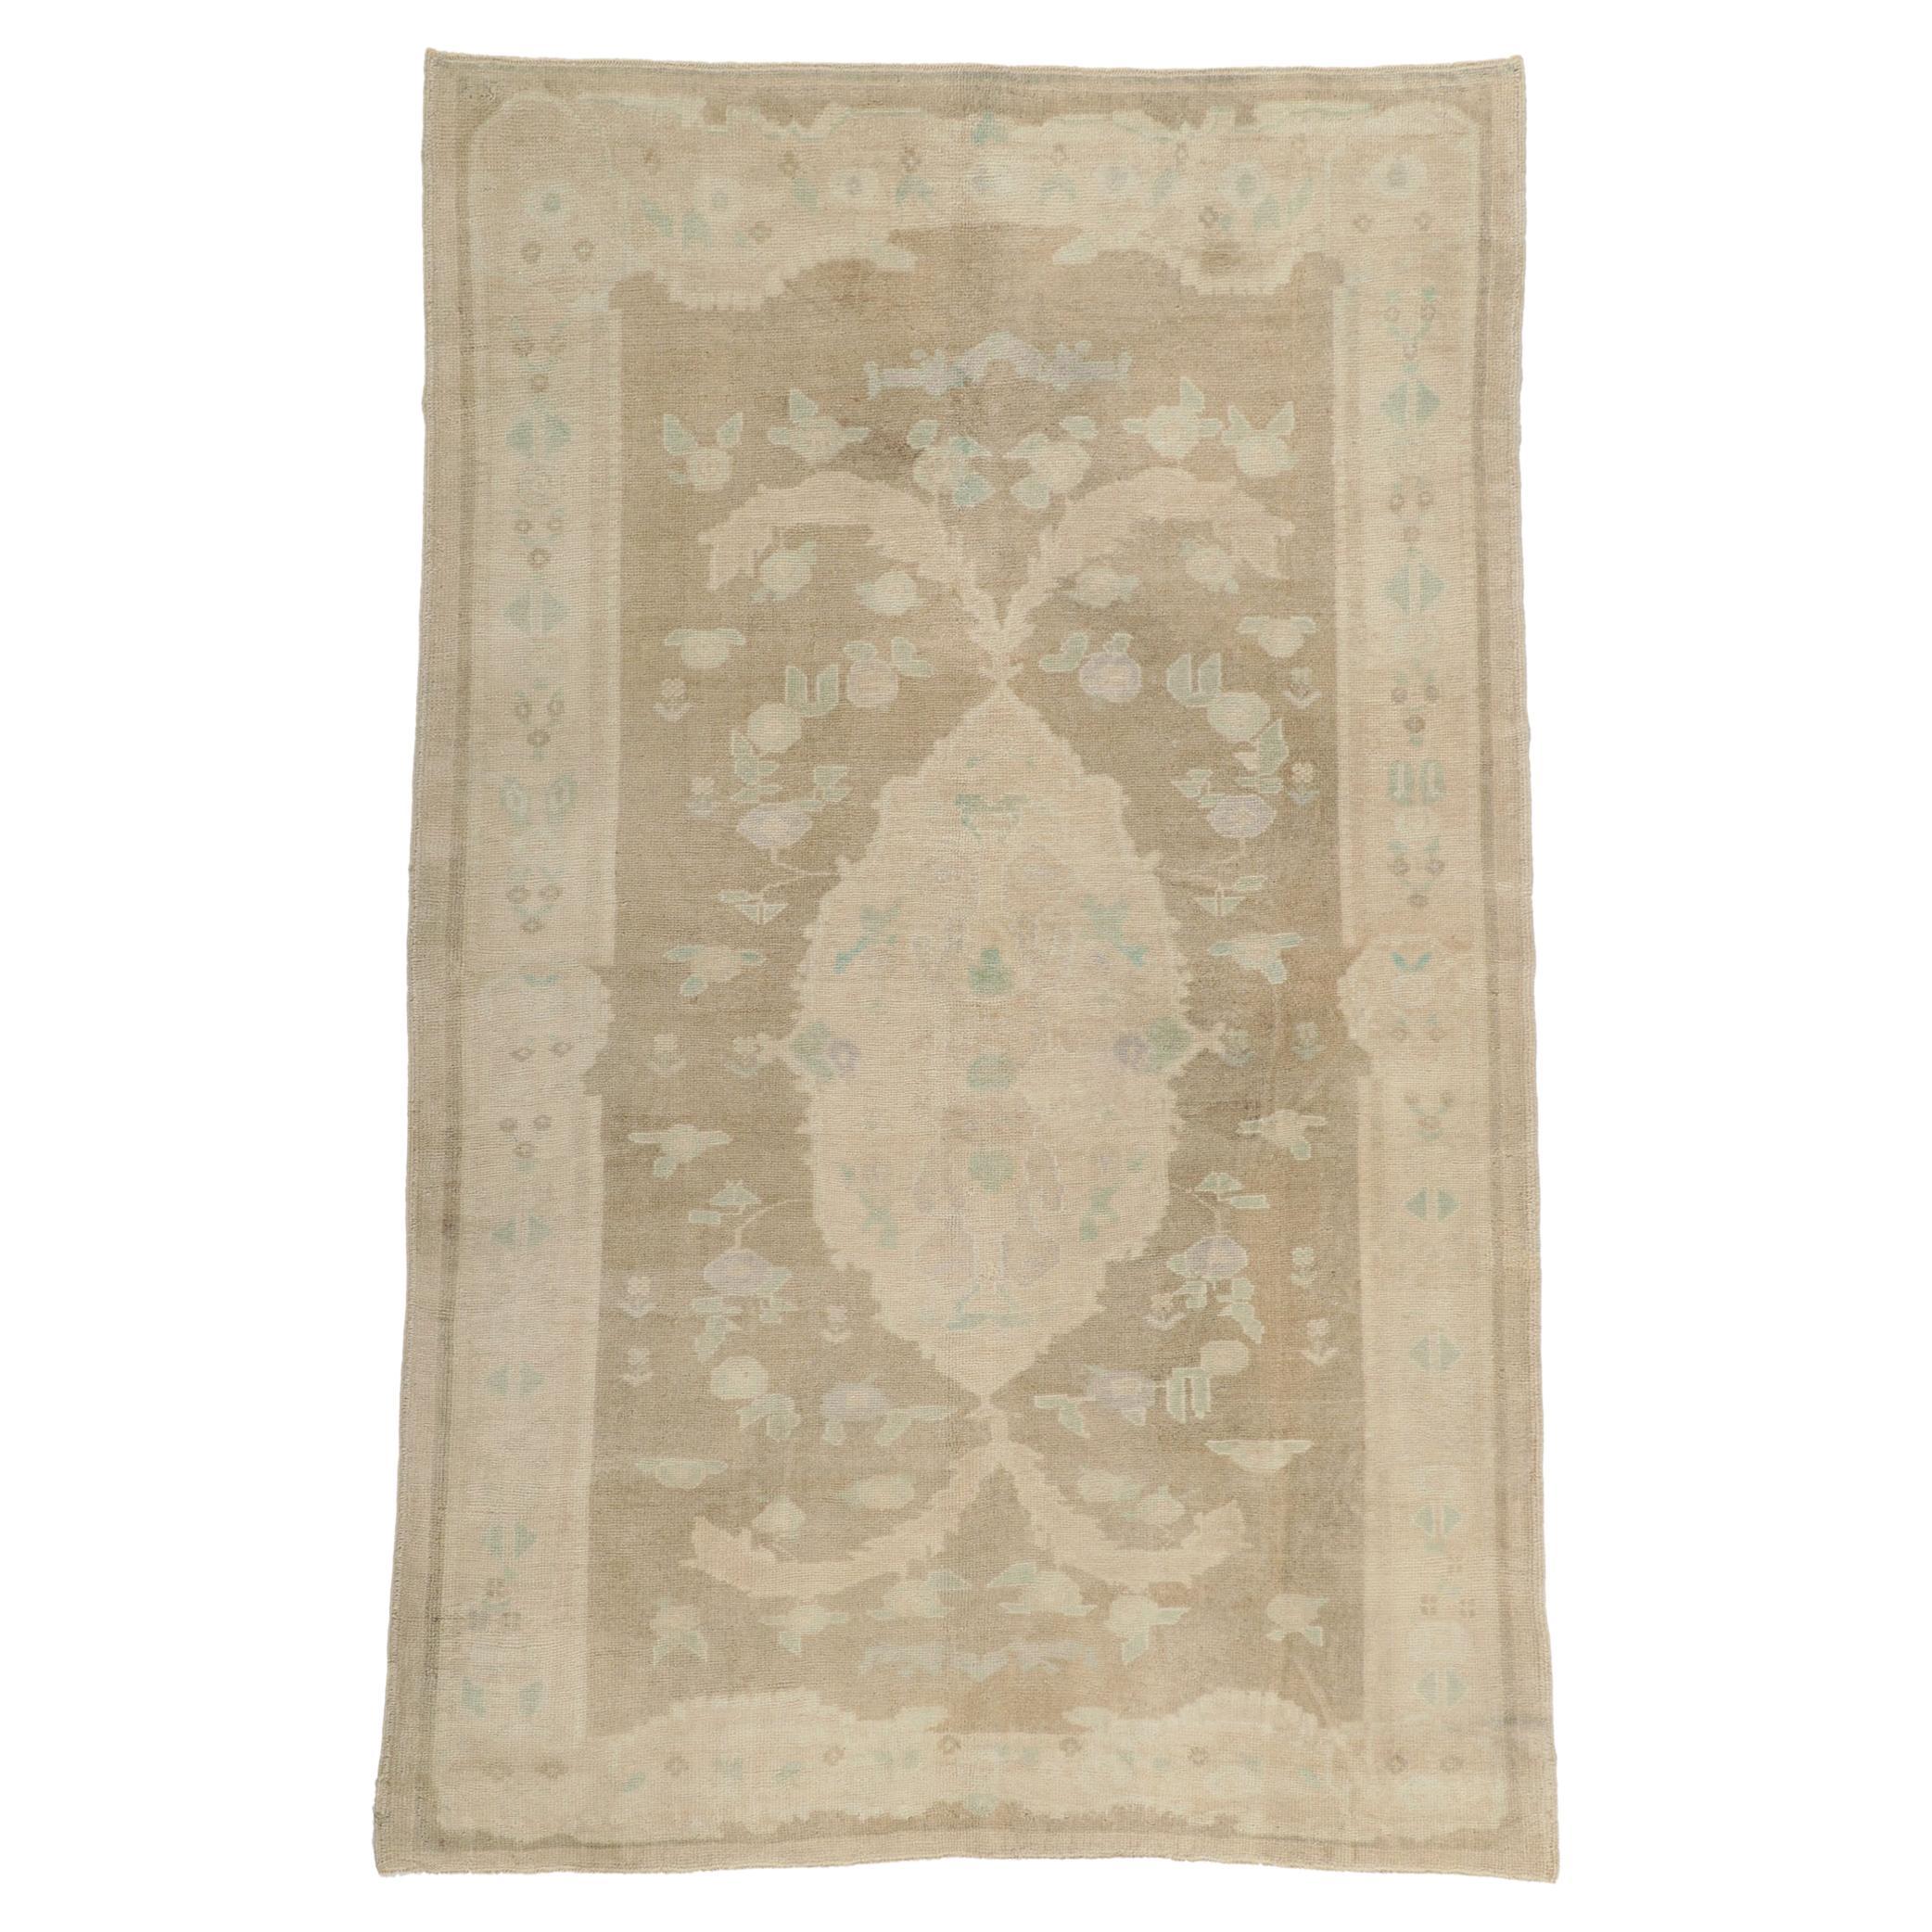 Vintage Turkish Oushak Rug with Faded Soft Earth-Tone Colors